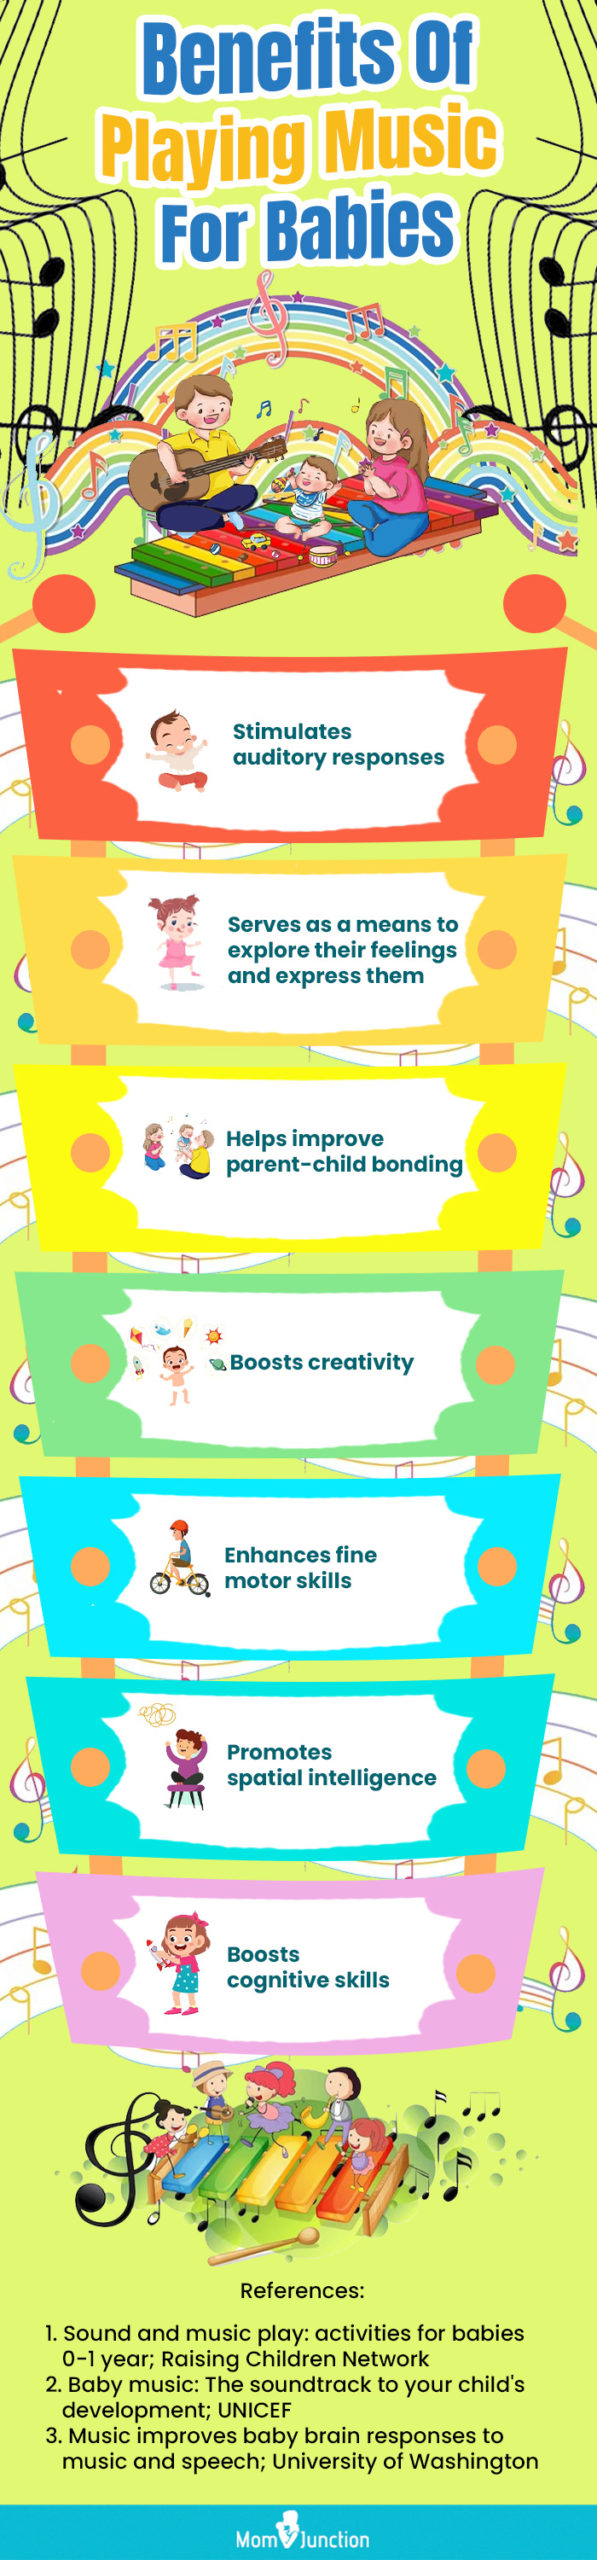 Benefits Of Playing Music For Babies (infographic)